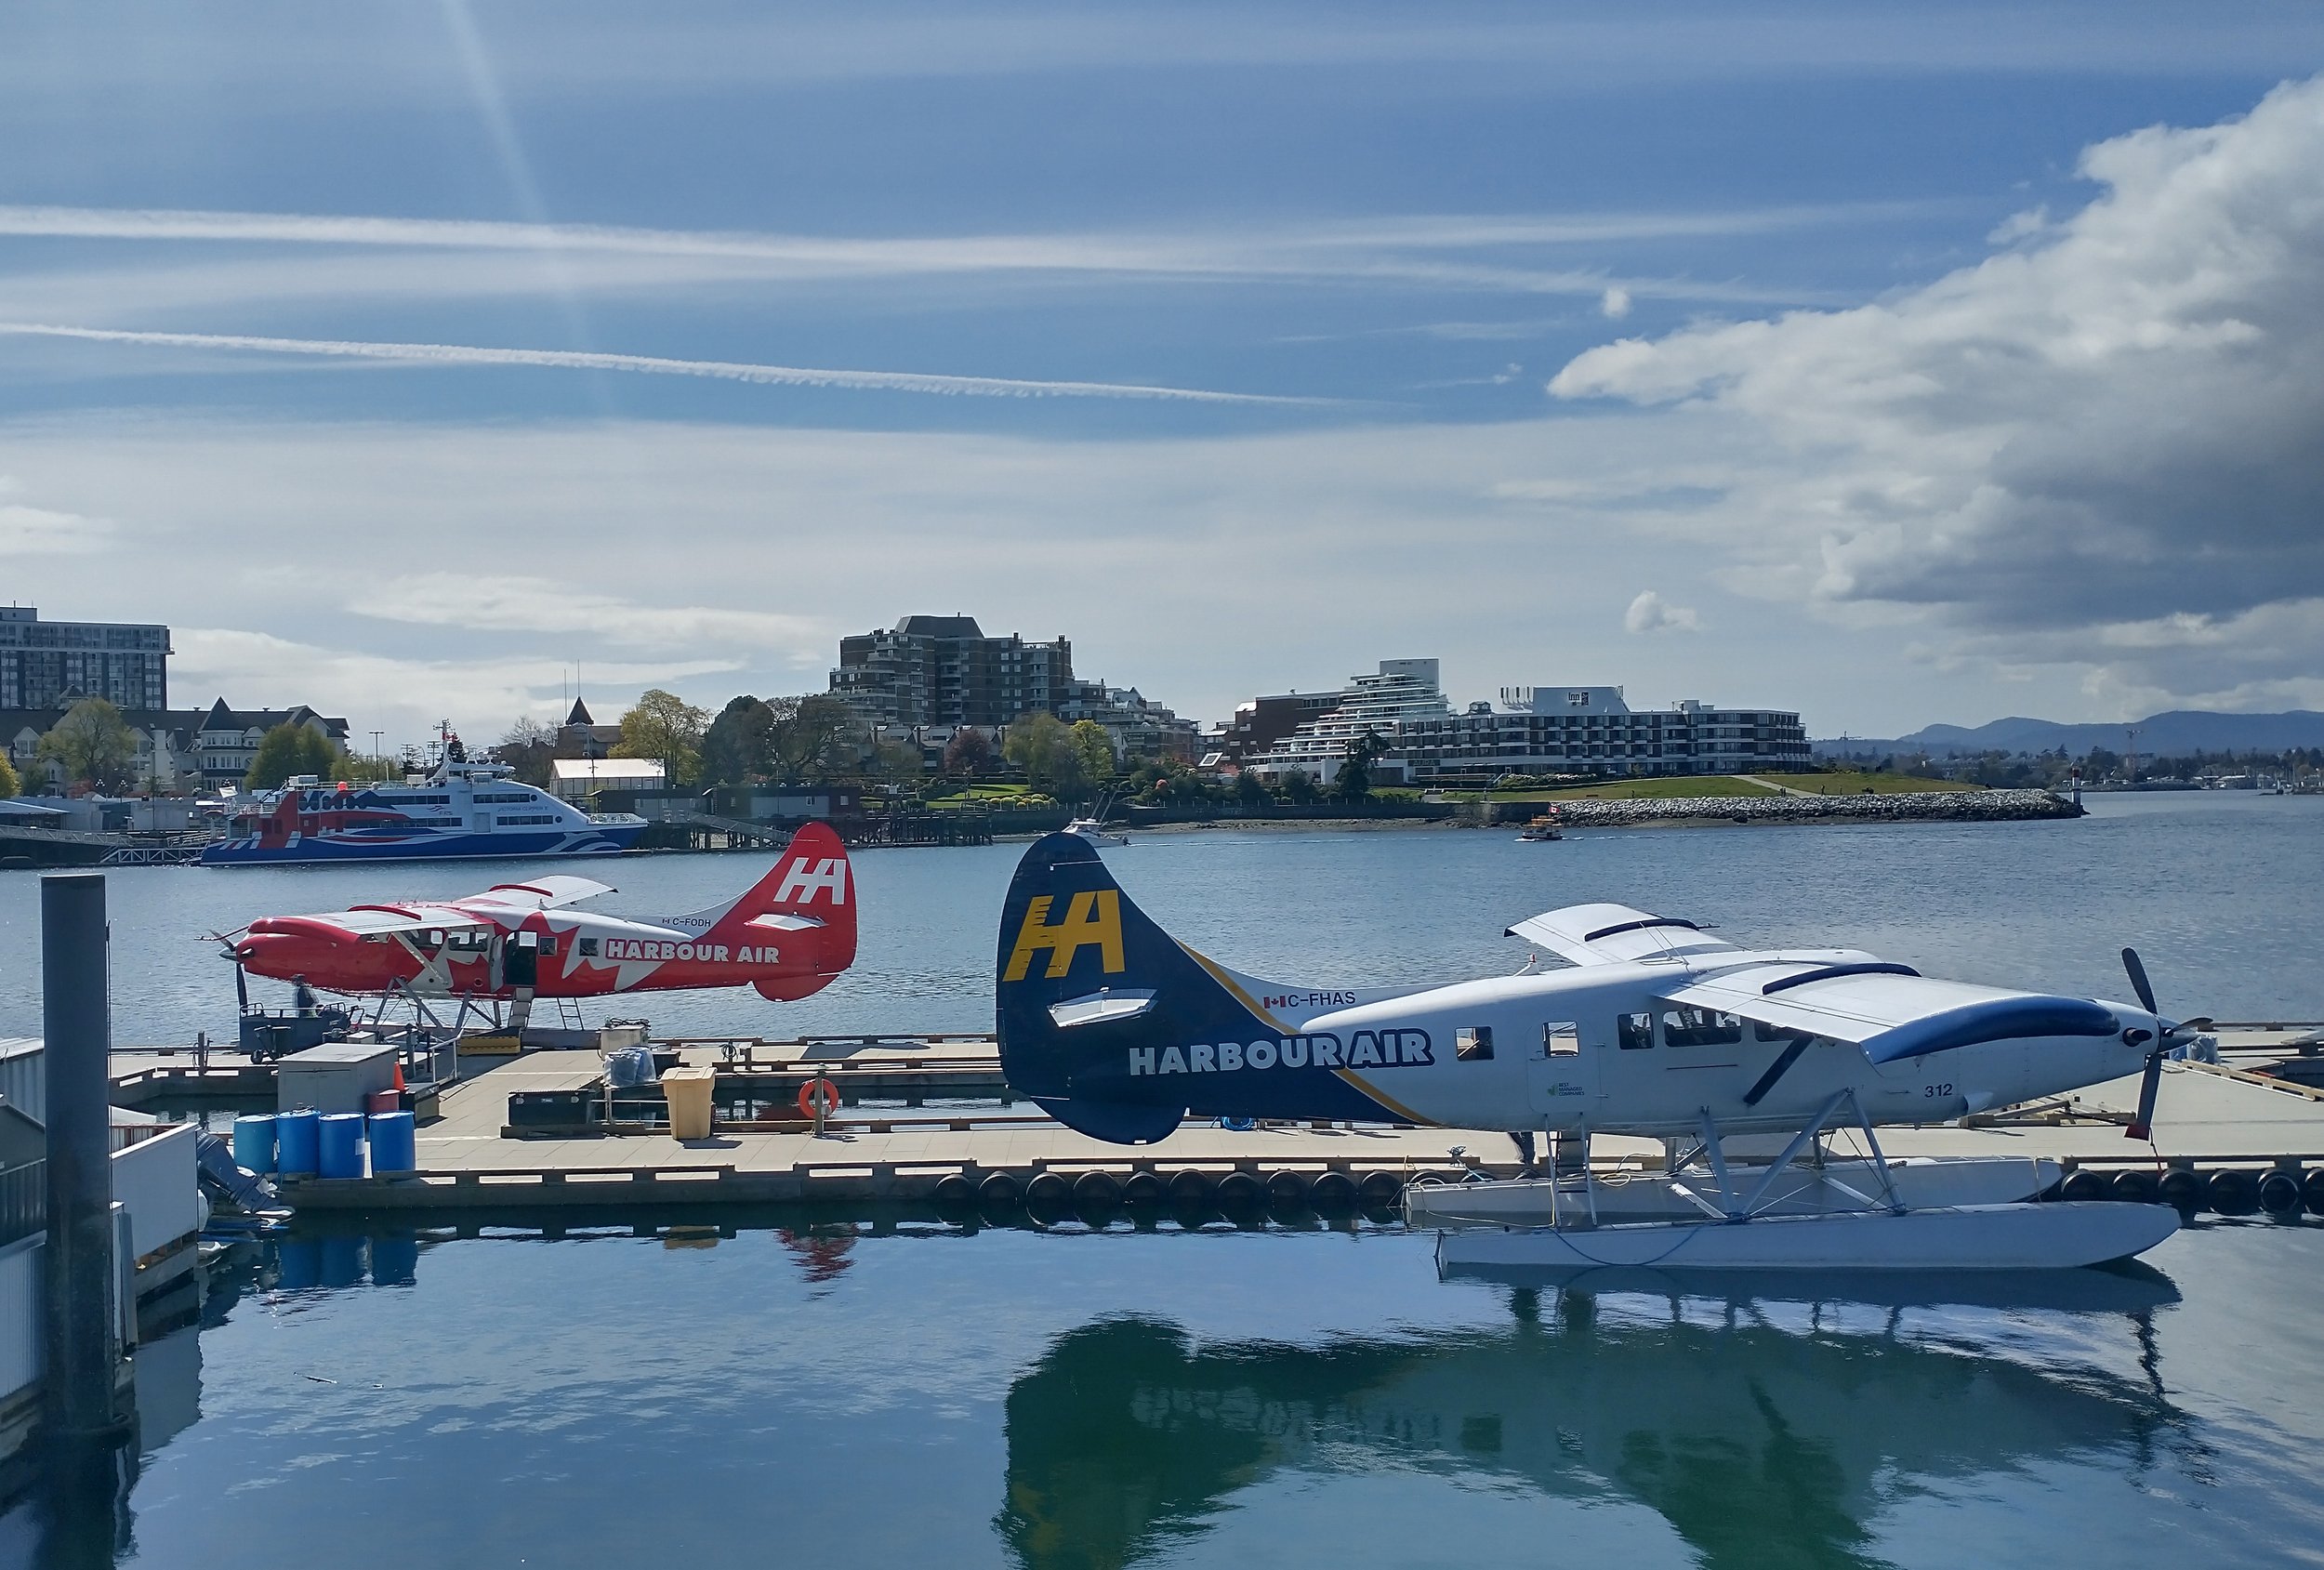  Harbour air also has several terminals on Vancouver Island itself, providing very rapid but expensive travel in the area and also to the USA. 